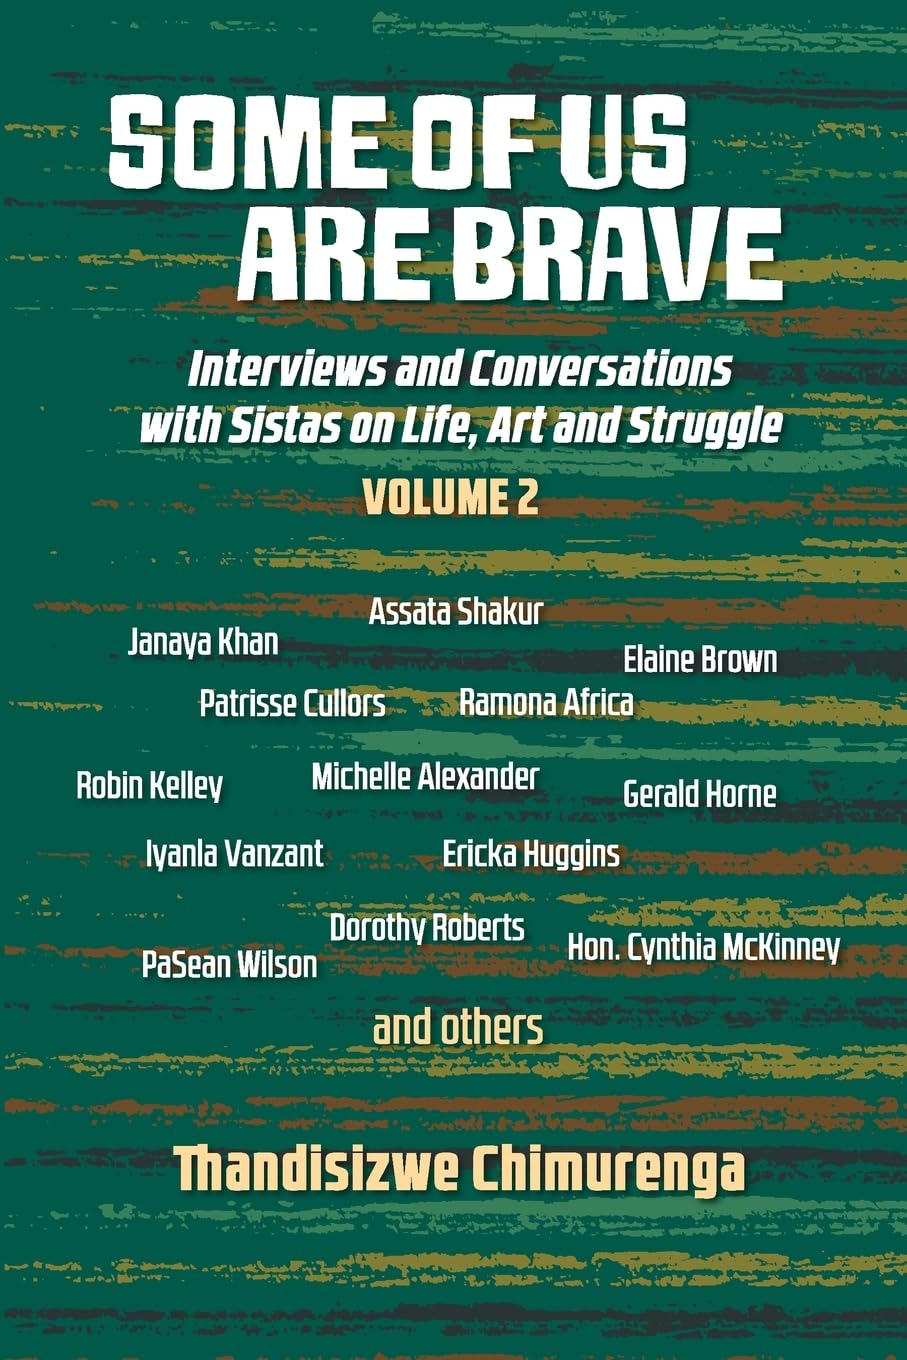 Some of us are brave (Vol 2): Interviews and Conversations With Sistas on Life, Art and Struggle, 2003-2016